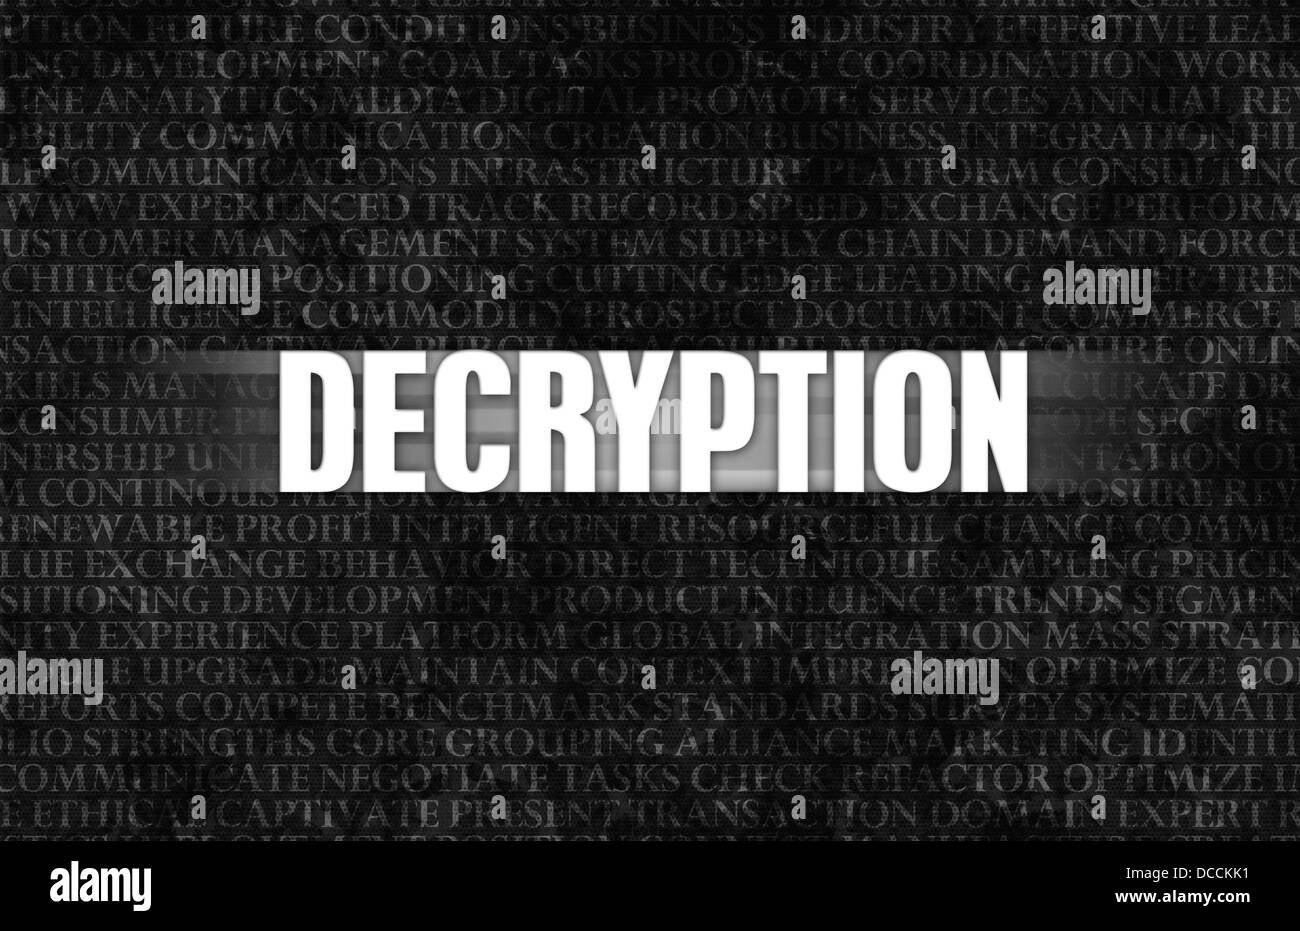 Decryption in Business as Motivation in Stone Wall Stock Photo